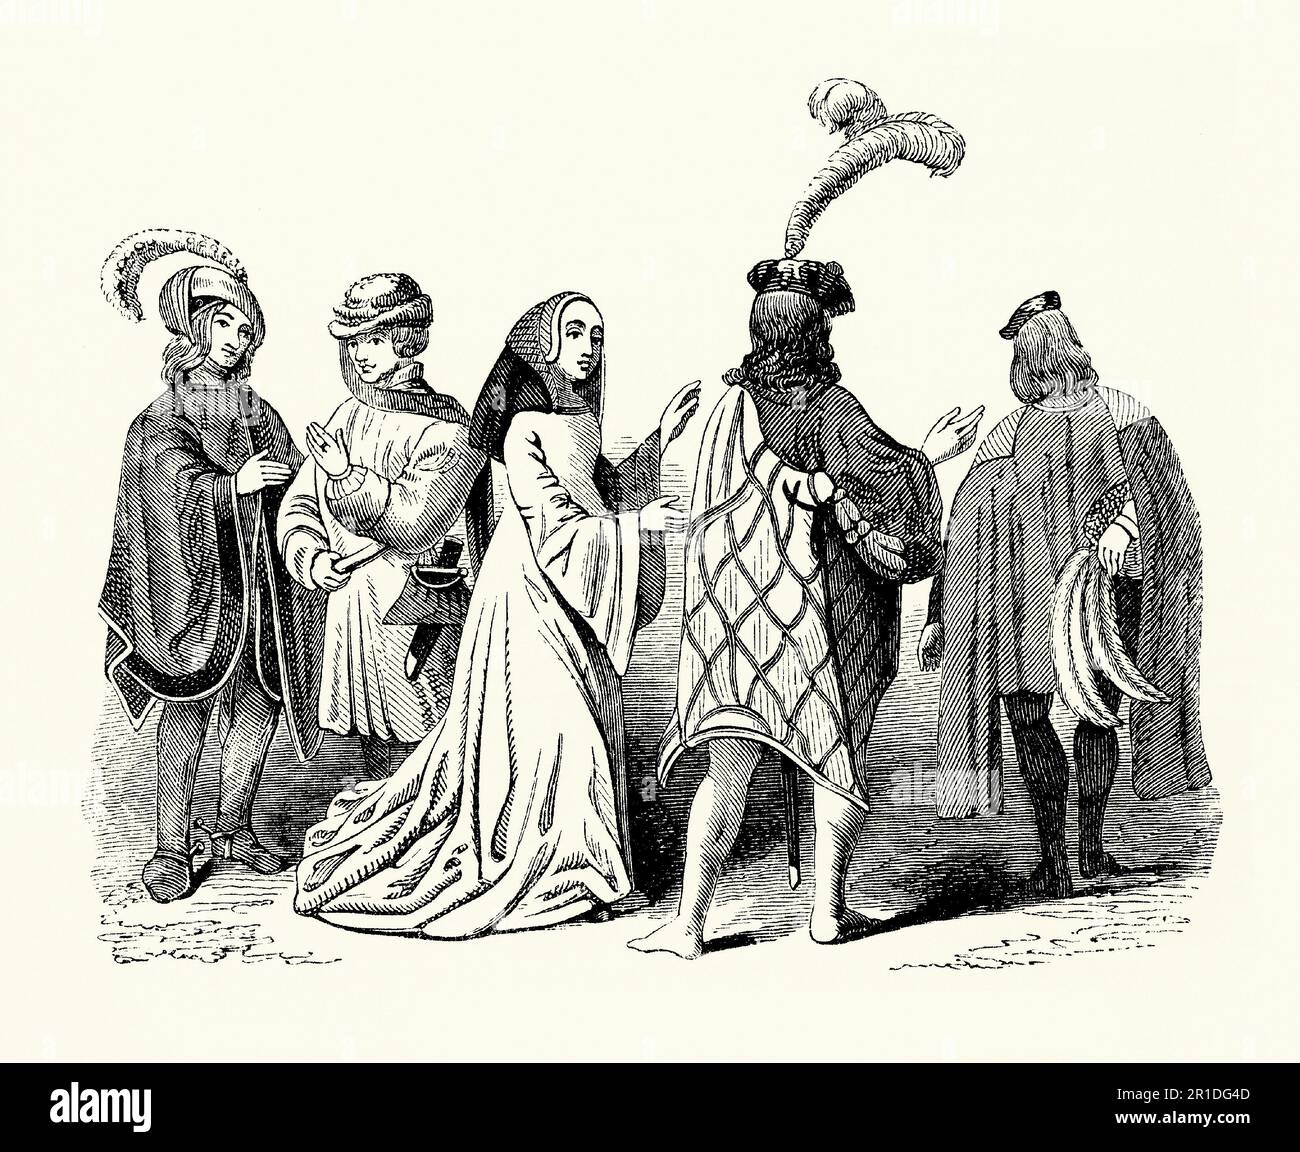 An old engraving of clothing worn in Tudor times in England. The style of dress dates from the late 15th and early 16th centuries during the reign of Henry VII (1485–1509). Notable here are the felt hats worn by the men and ostrich feather plumage that adorned them. Capes or gowns formed the outer clothing layer – the woman’s gown has long, hanging sleeves. Long hair was in vogue at the time. This attire would have been worn by those in society with money, landed gentry, the nobility and others connected to the royal court. Stock Photo